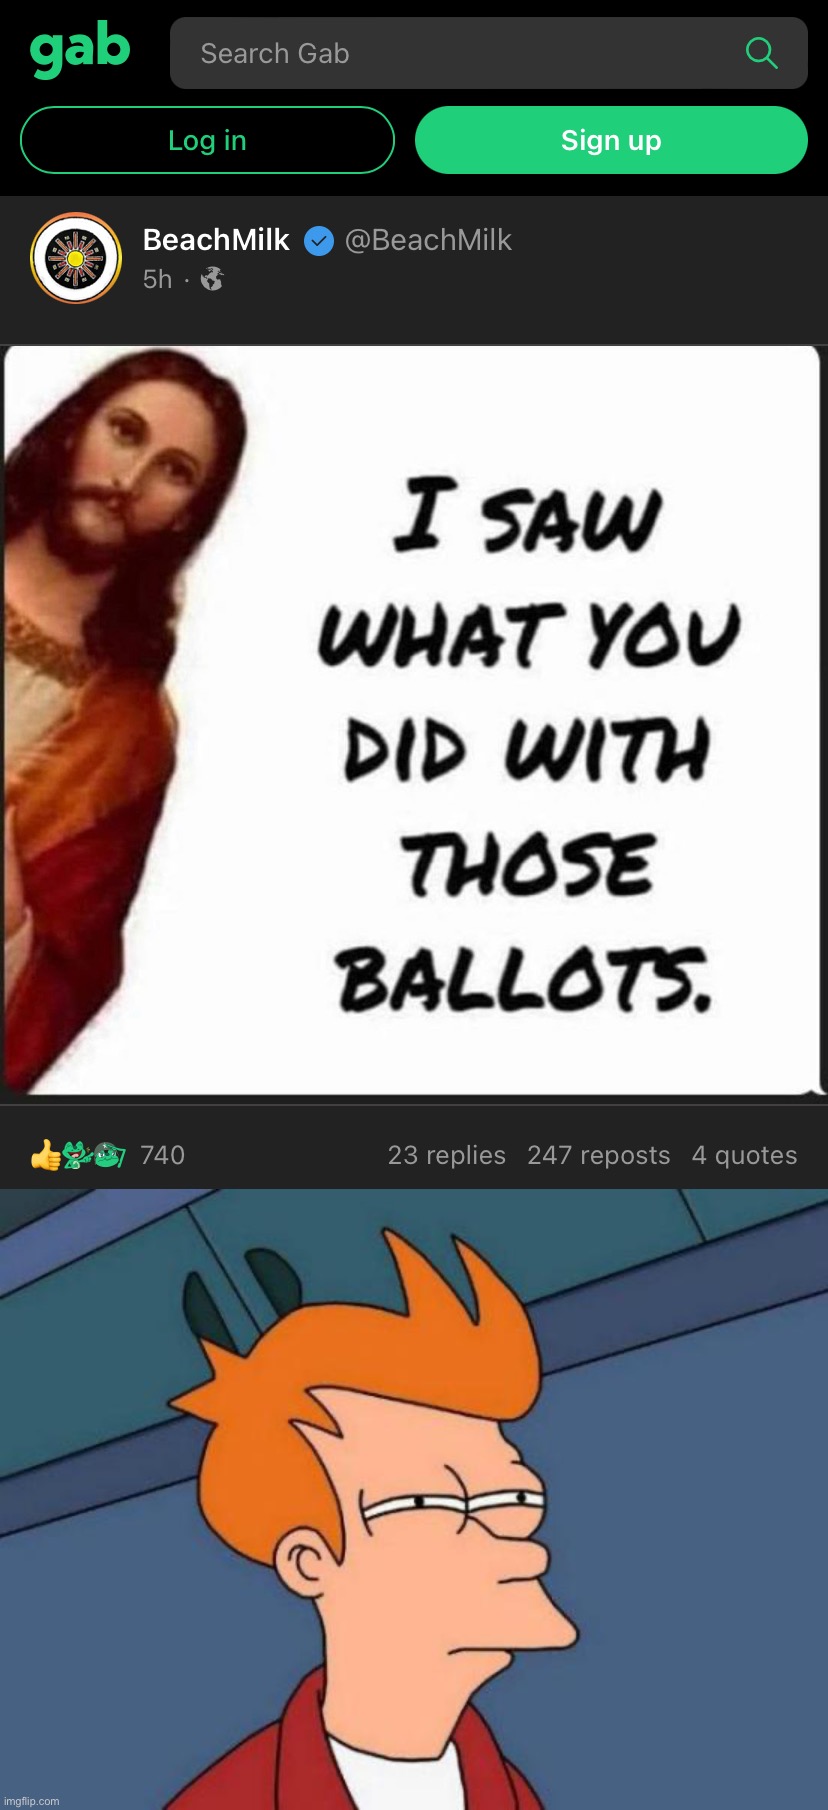 Thought I’d check with our friends at Gab to see what’s movin’ and shakin’. Good news: Jesus is now overseeing our elections | image tagged in jesus i saw what you did with those ballots,memes,futurama fry,gab,social media,jesus | made w/ Imgflip meme maker